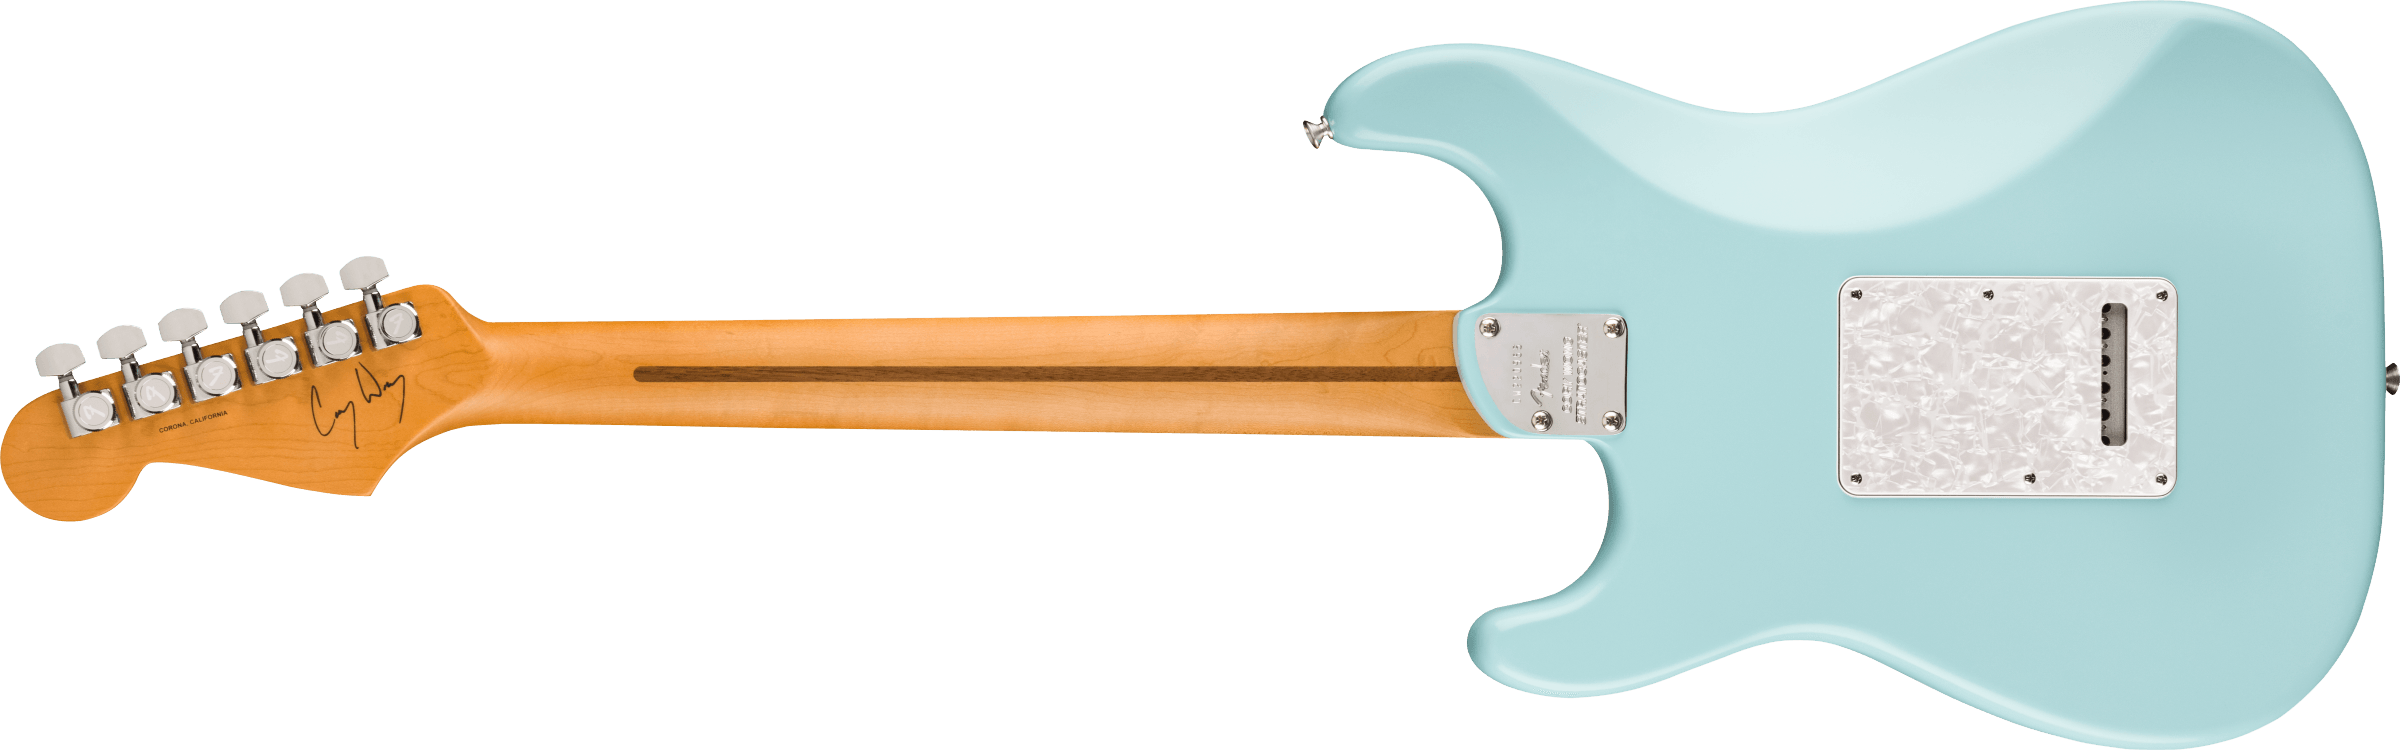 Fender Limited Edition Cory Wong Stratocaster®, Rosewood Fingerboard, Daphne Blue